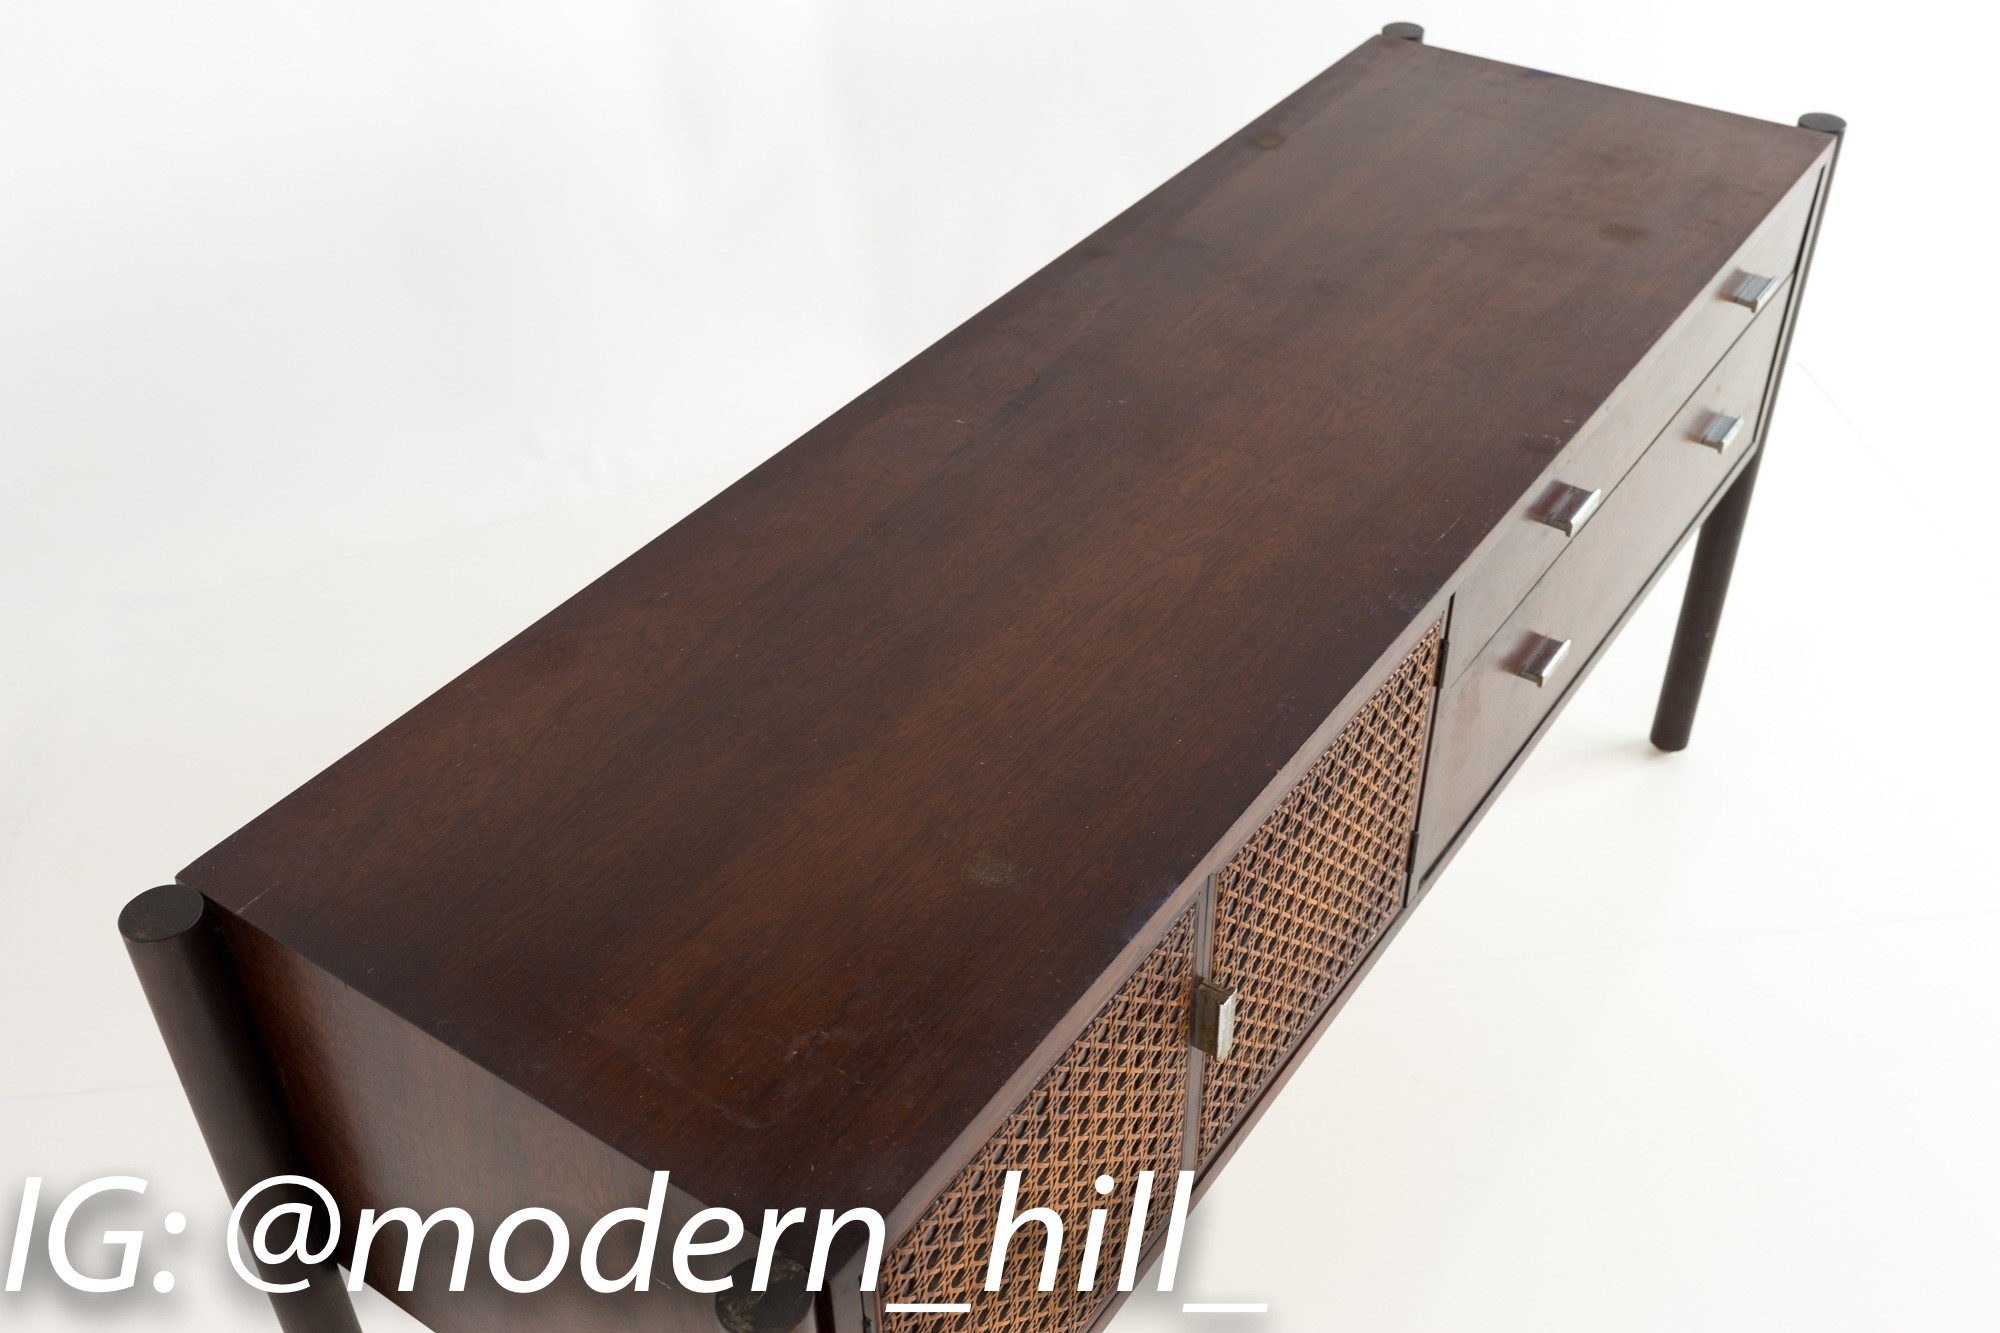 Founders Style Mid Century Walnut and Cane Console Credenza